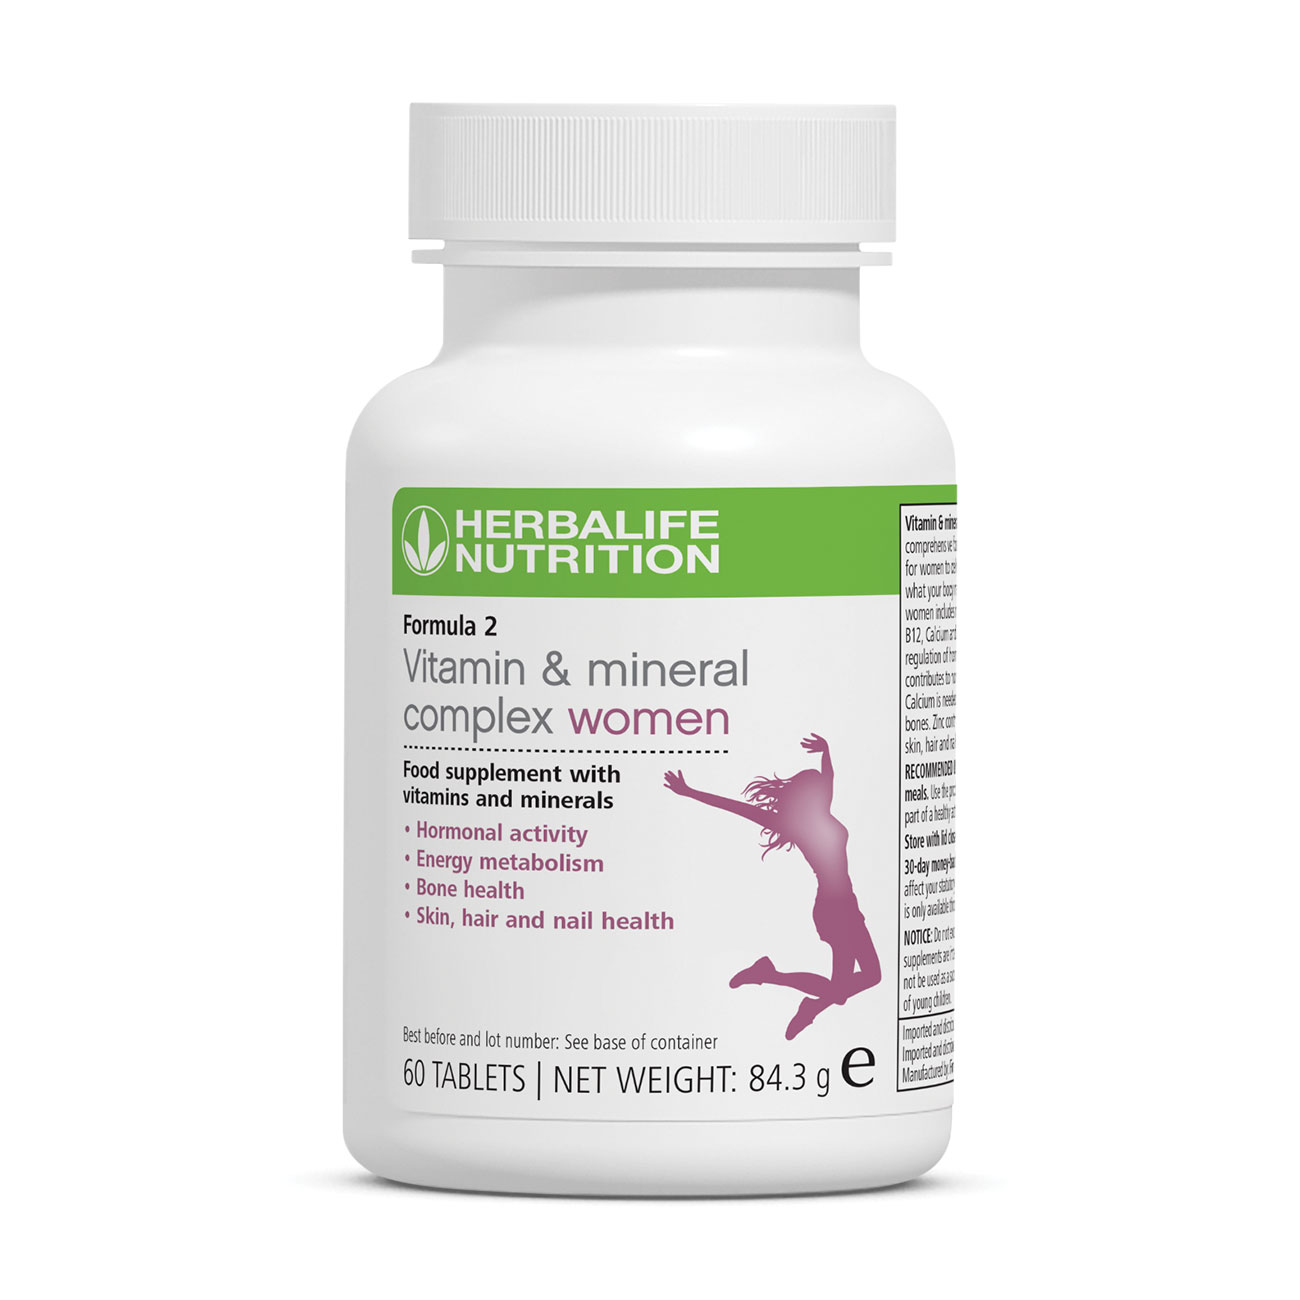 Formula 2 Vitamin & Mineral Complex Women 60 tablets | Herbalife Nutrition  GH